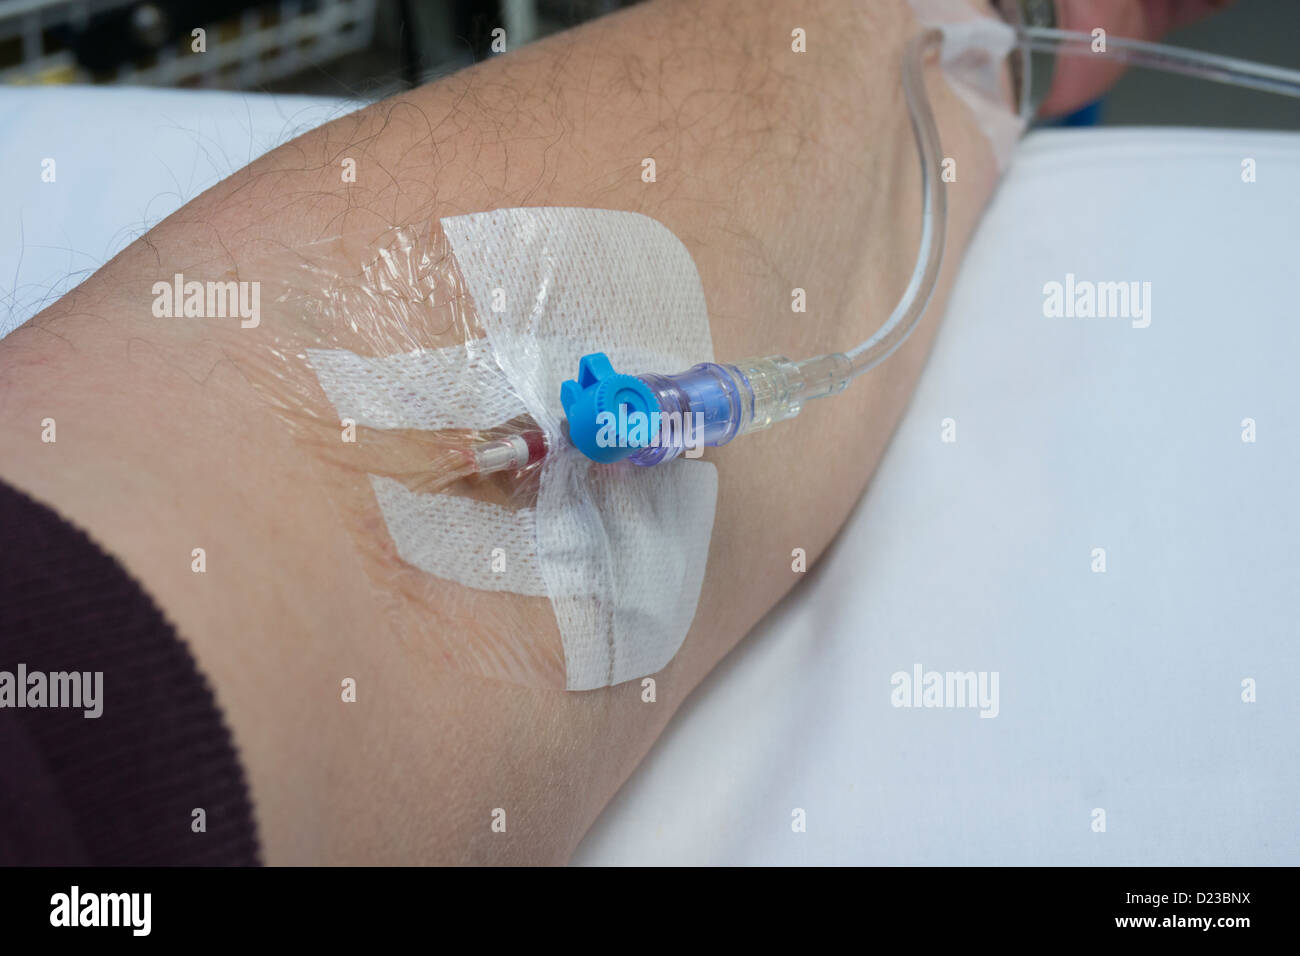 Medical cannula in patient's arm Stock Photo